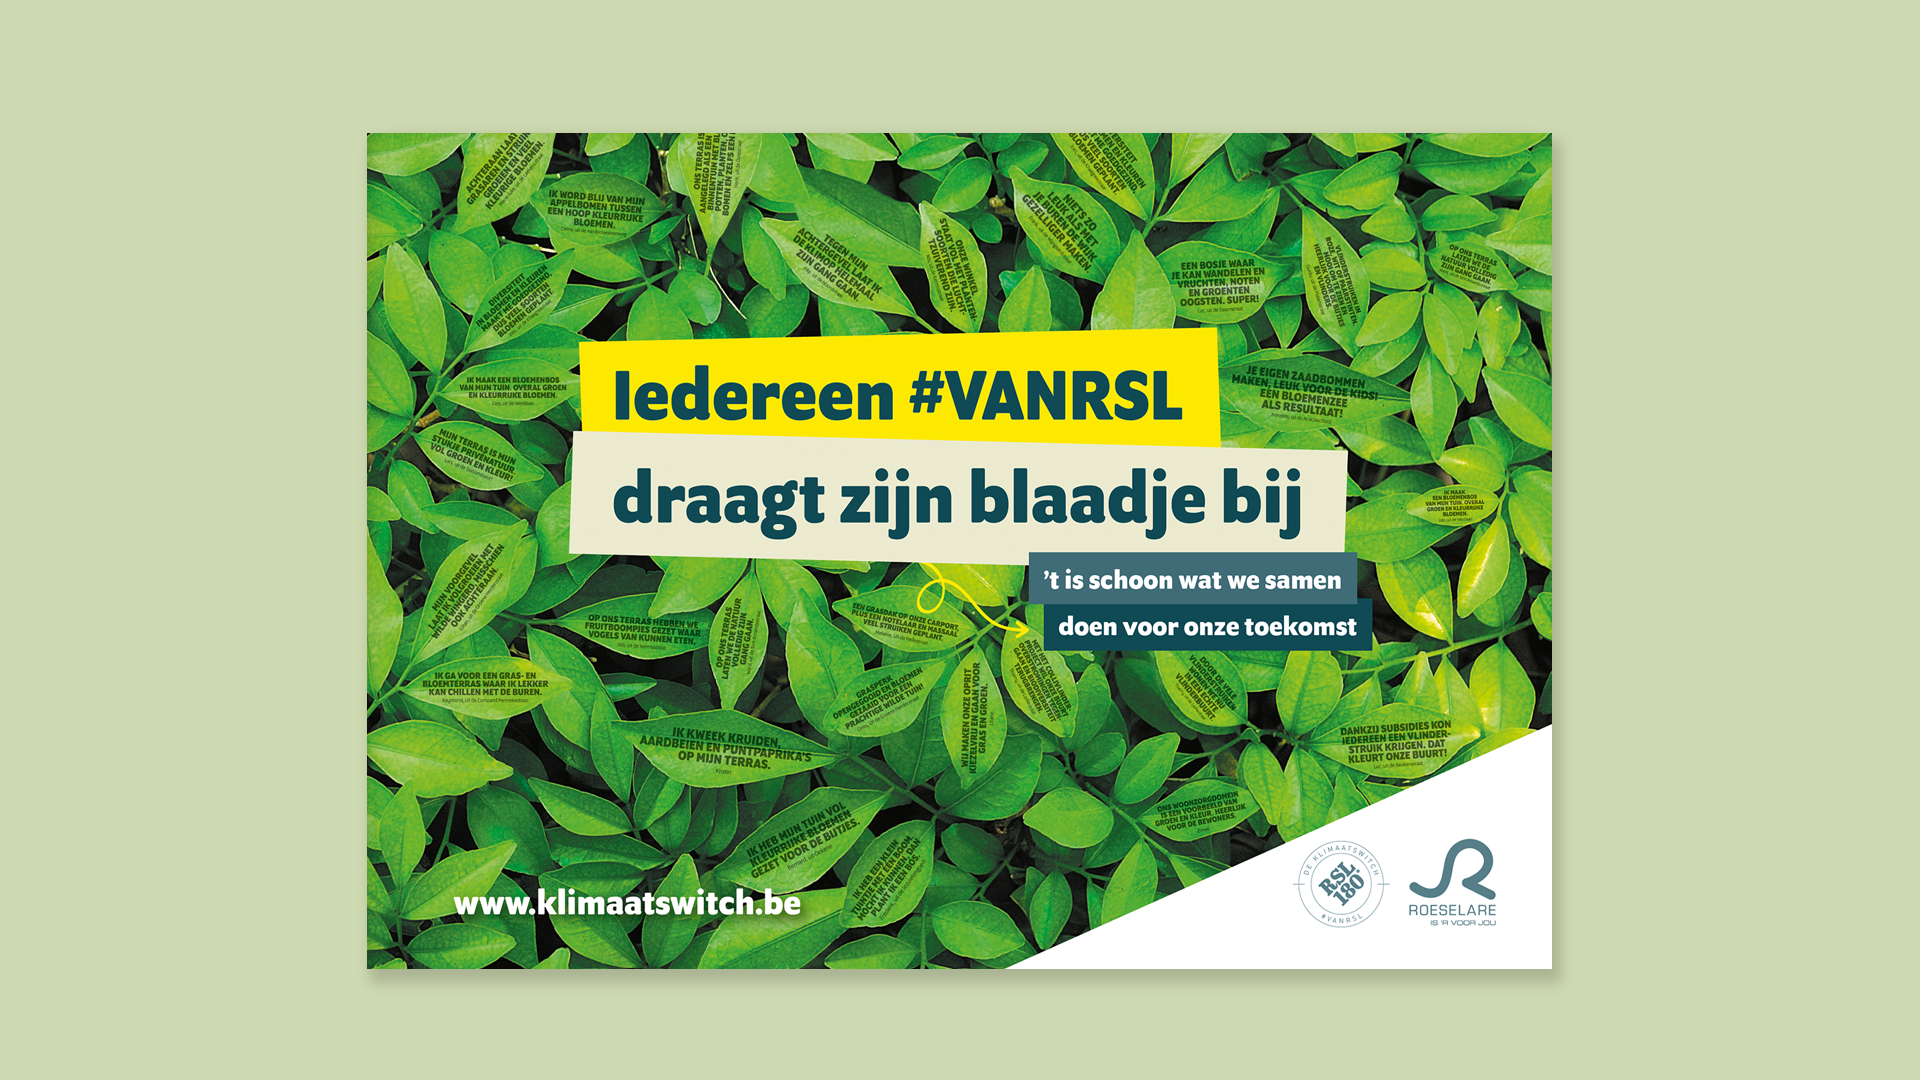 June20: STAD ROESELARE Together for a greener city, banner